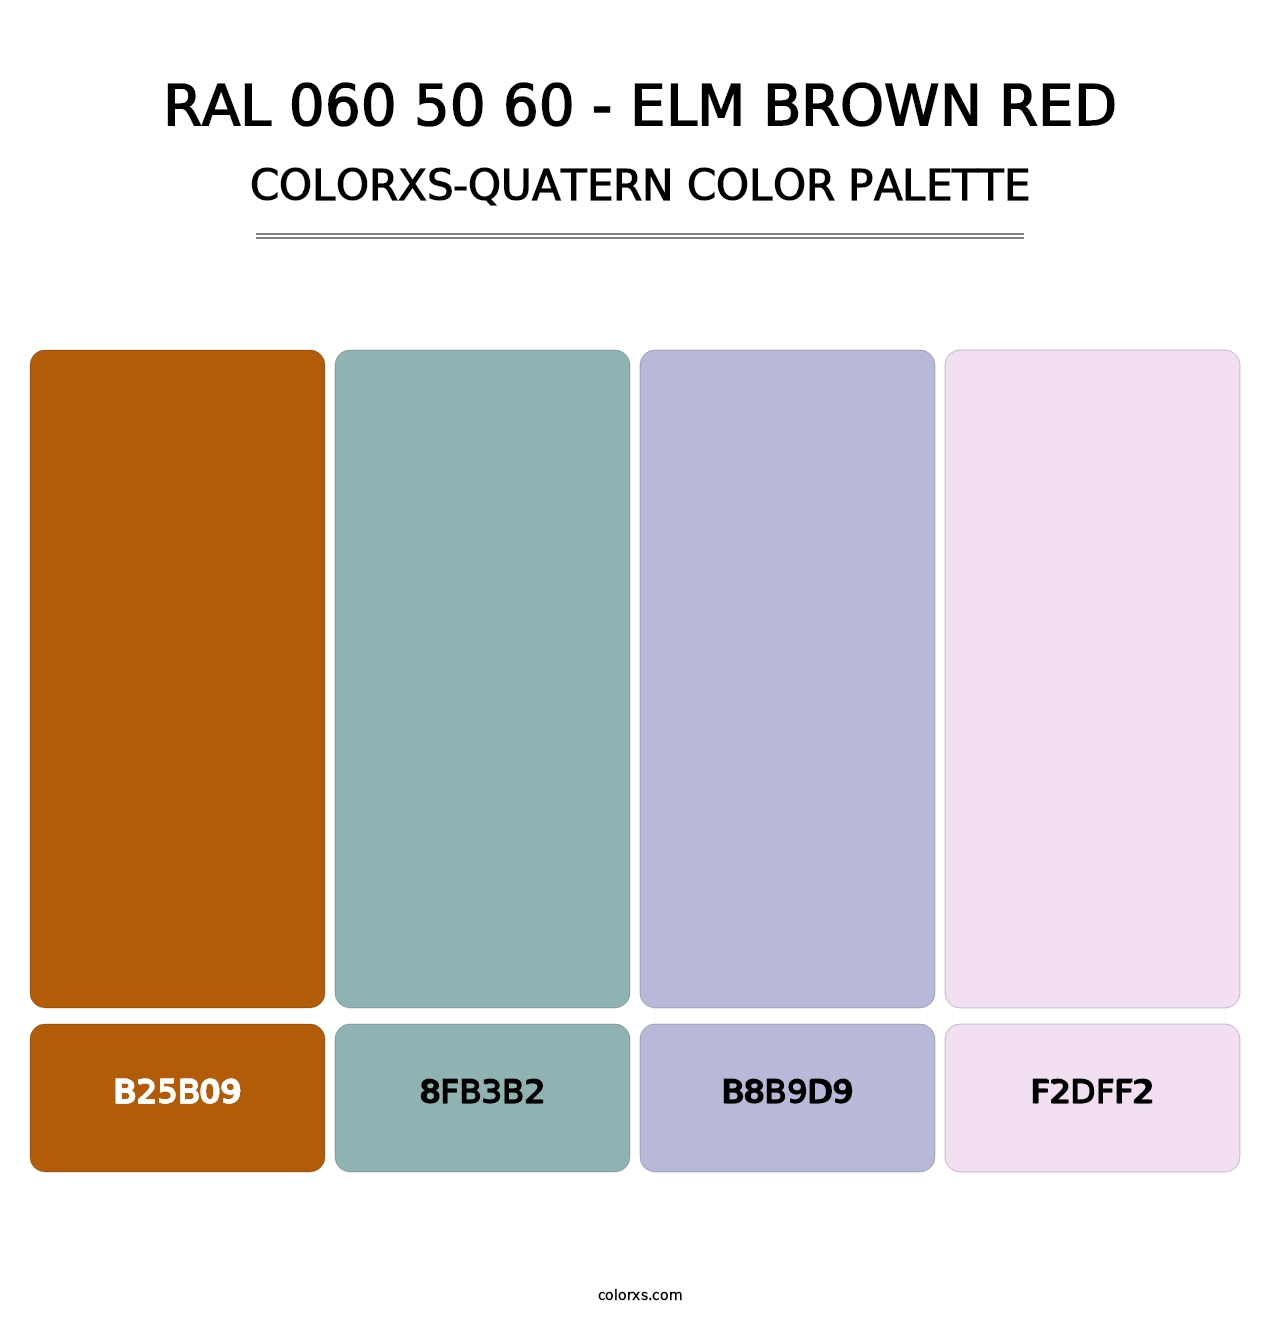 RAL 060 50 60 - Elm Brown Red - Colorxs Quatern Palette